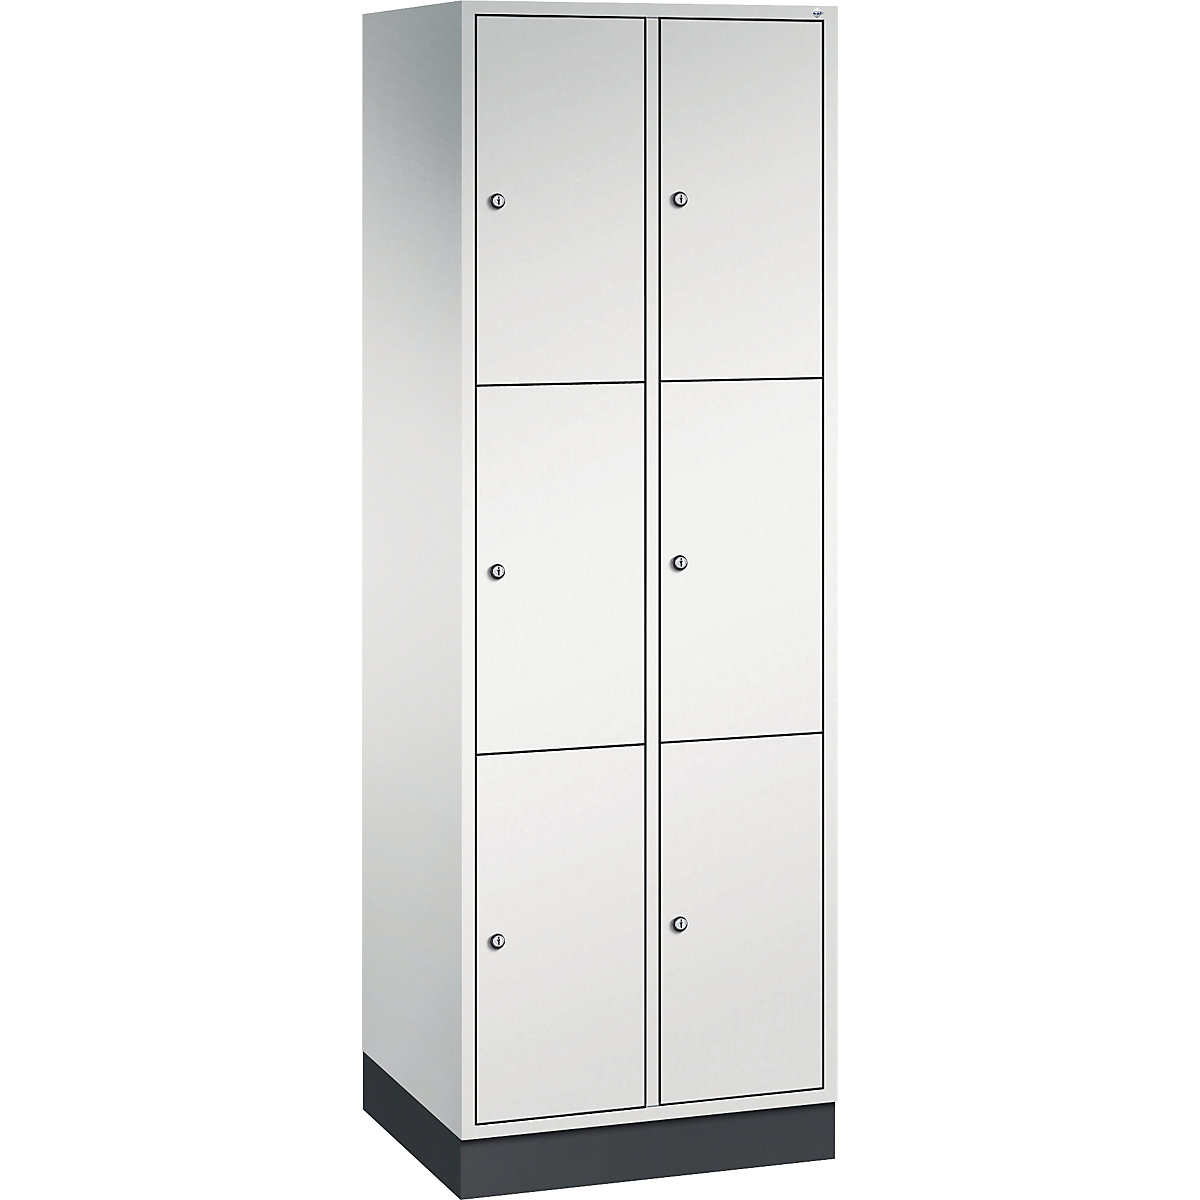 INTRO steel compartment locker, compartment height 580 mm – C+P, WxD 620 x 500 mm, 6 compartments, light grey body, light grey doors